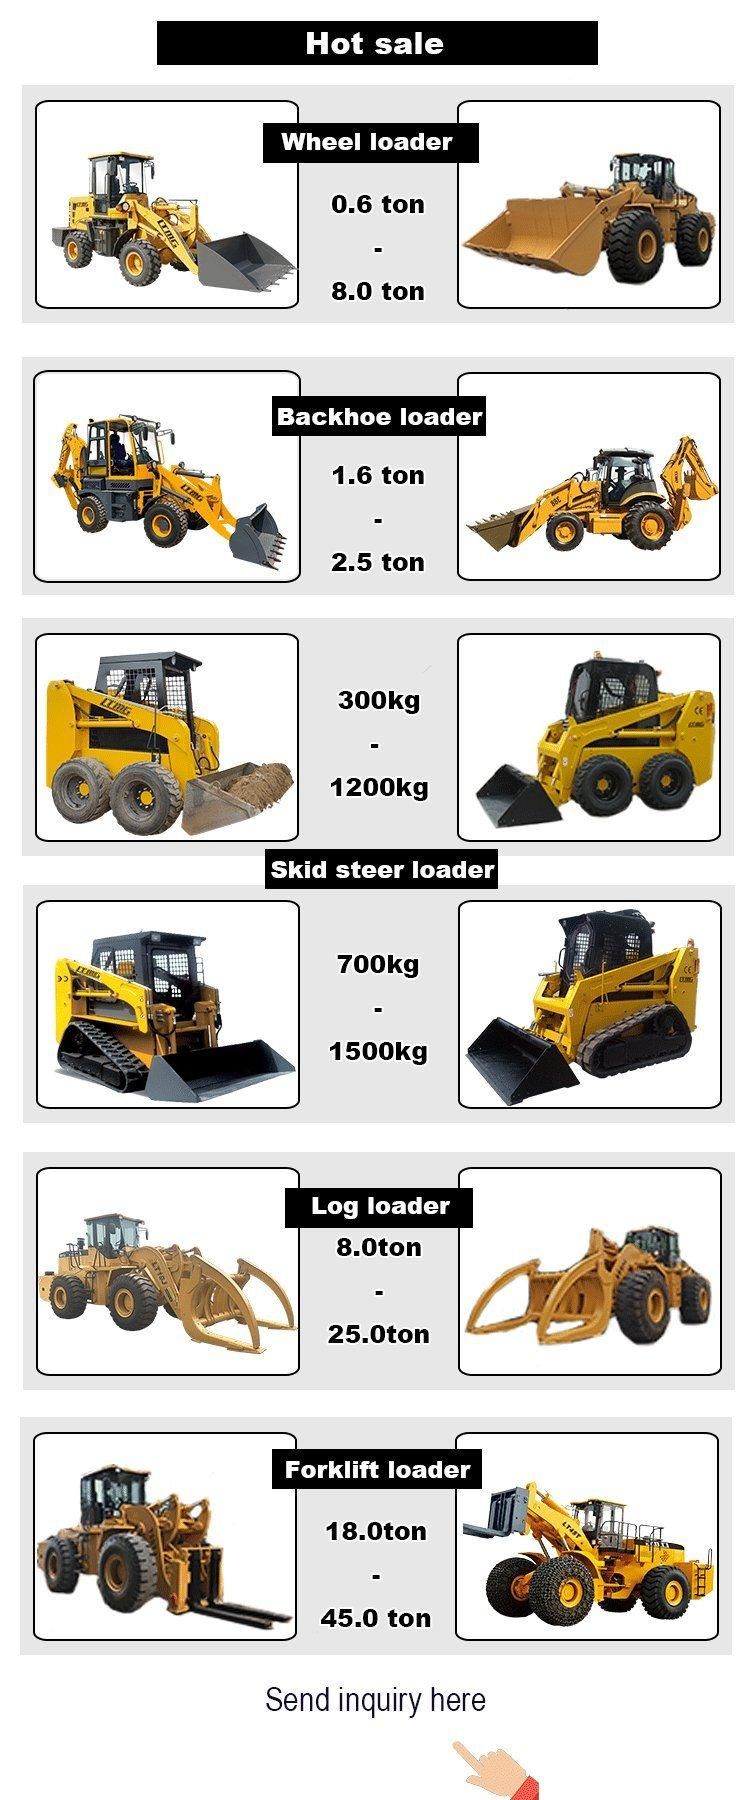 CE Approved Ltmg Price Small 1500kg Crawler Skid Steer Loader with High Quality